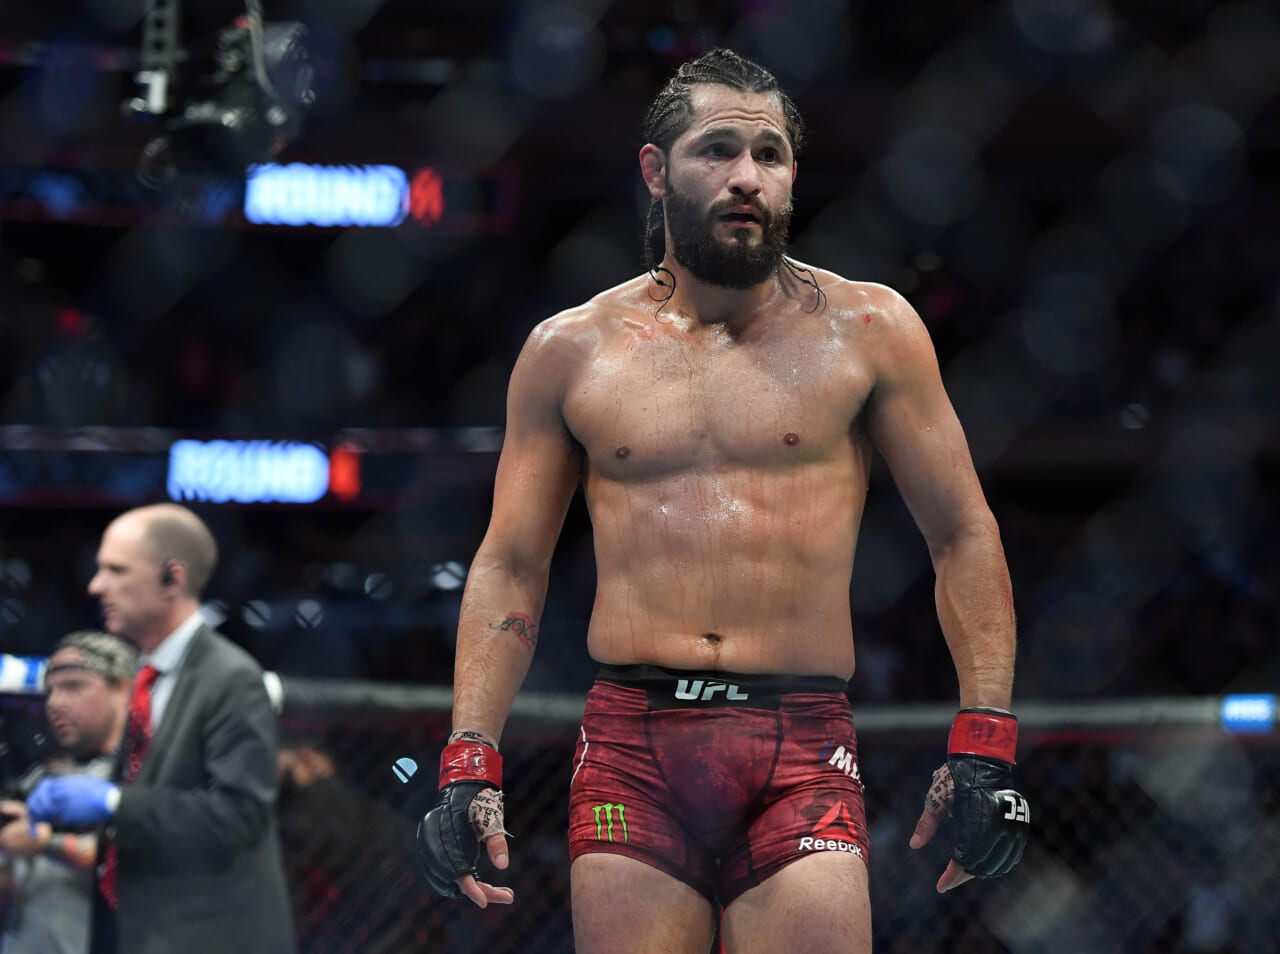 UFC: Jorge Masvidal’s offer was “Take it or leave it”